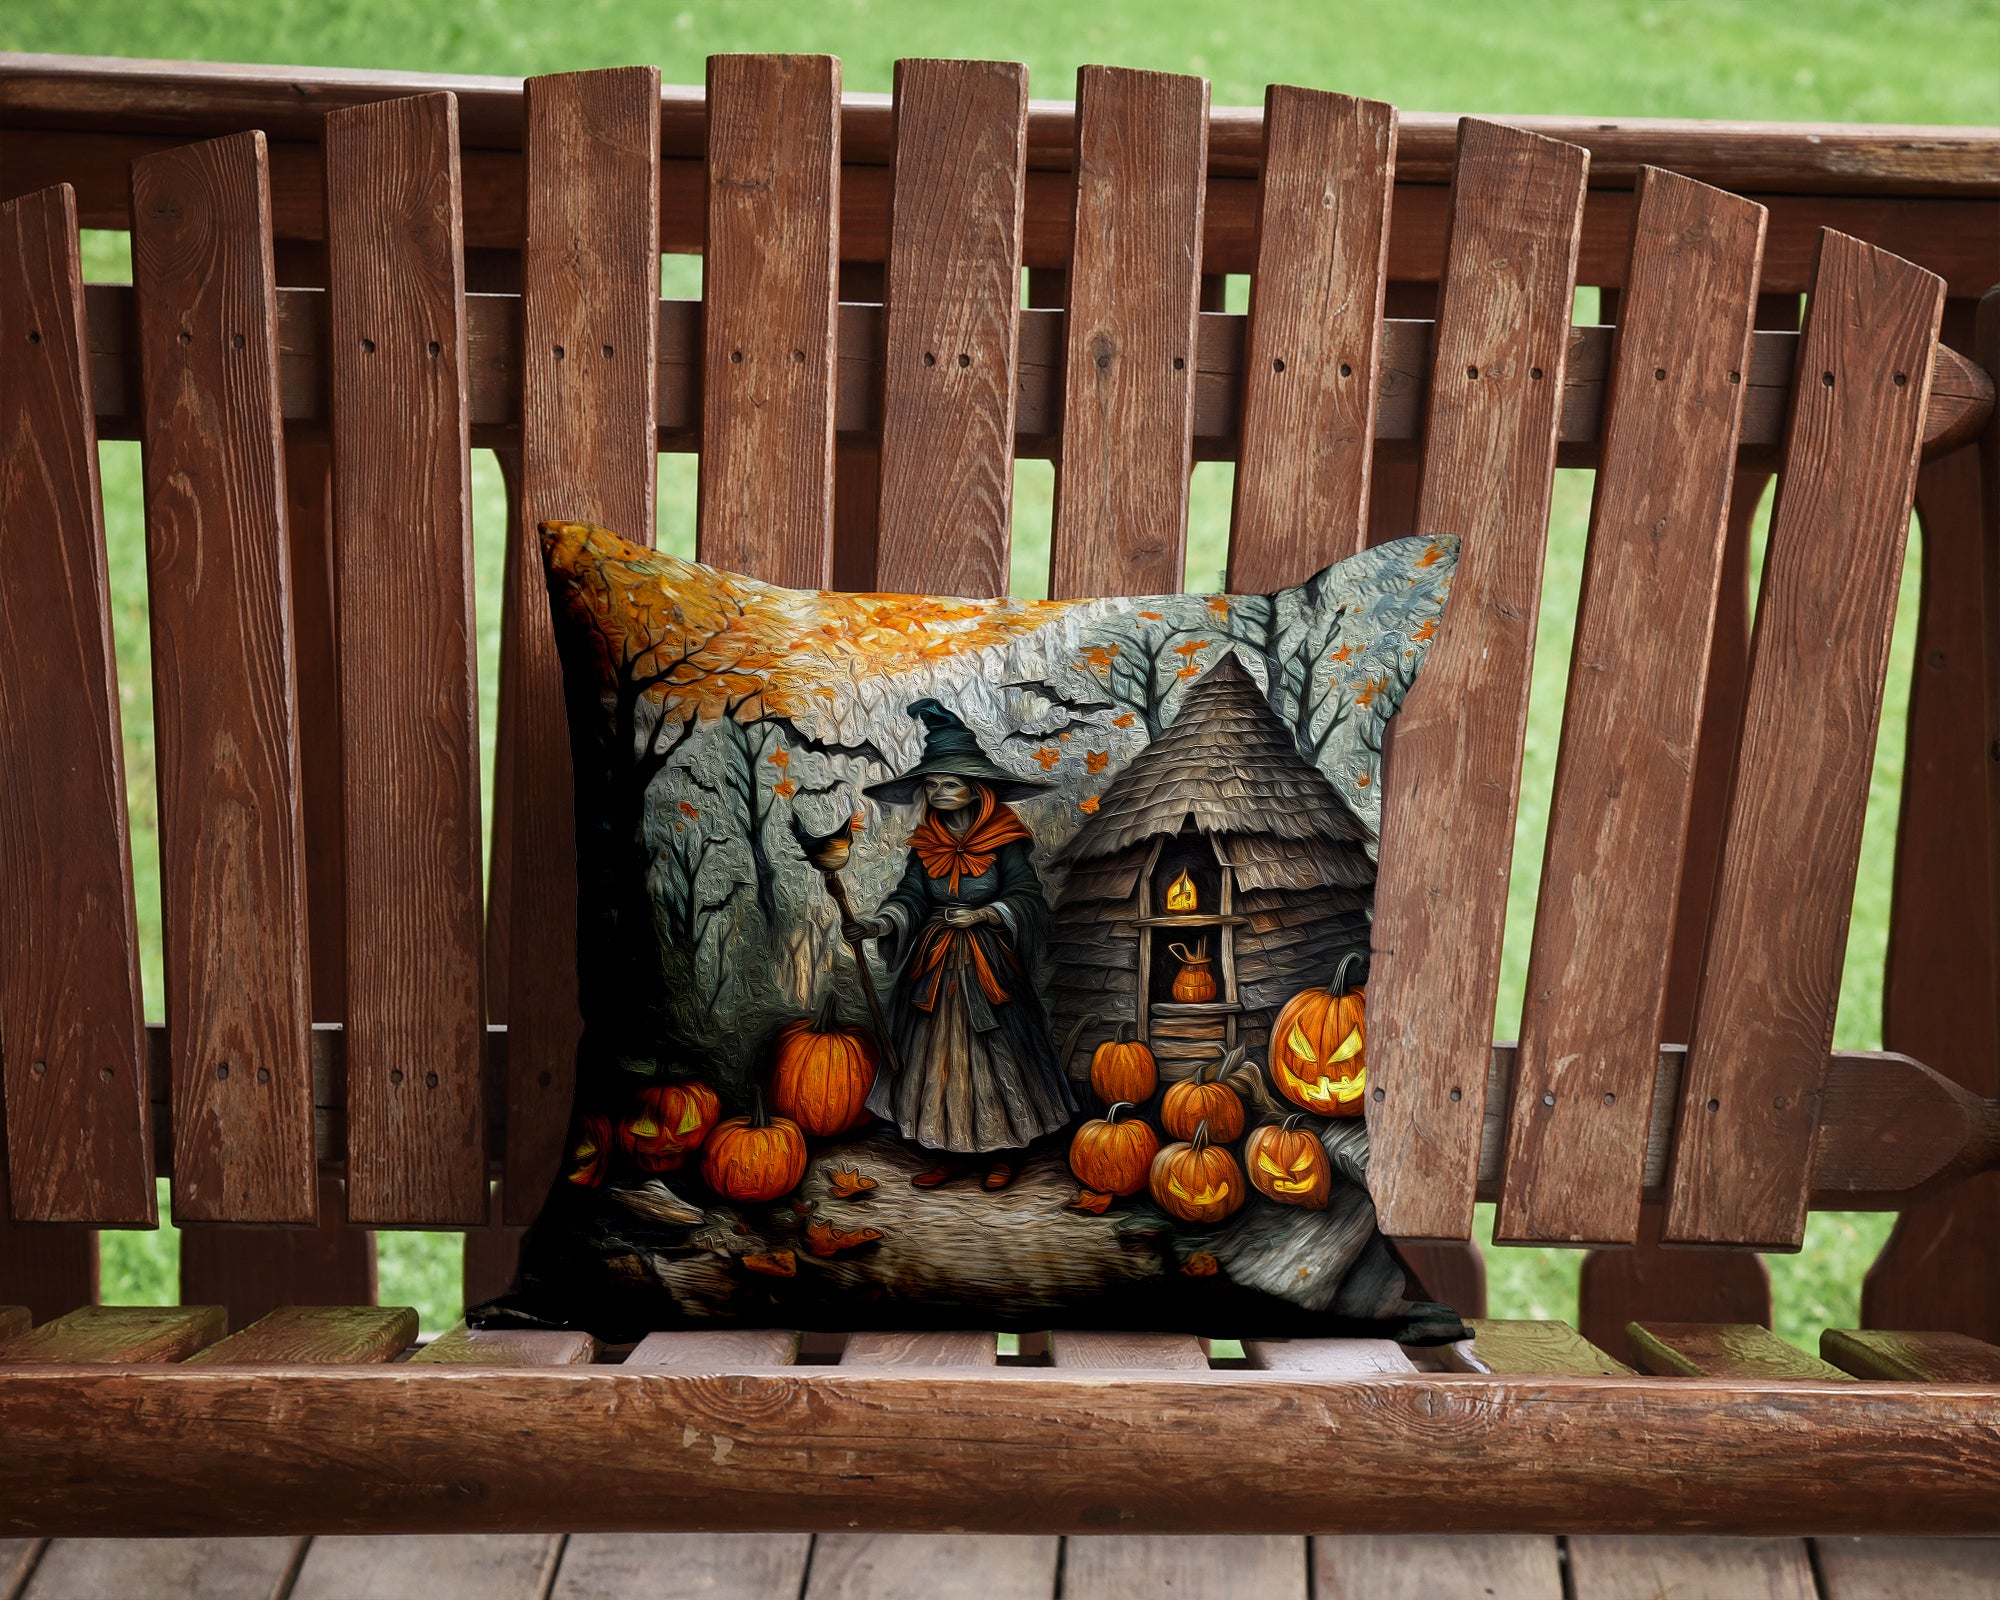 Slavic Witch Spooky Halloween Fabric Decorative Pillow